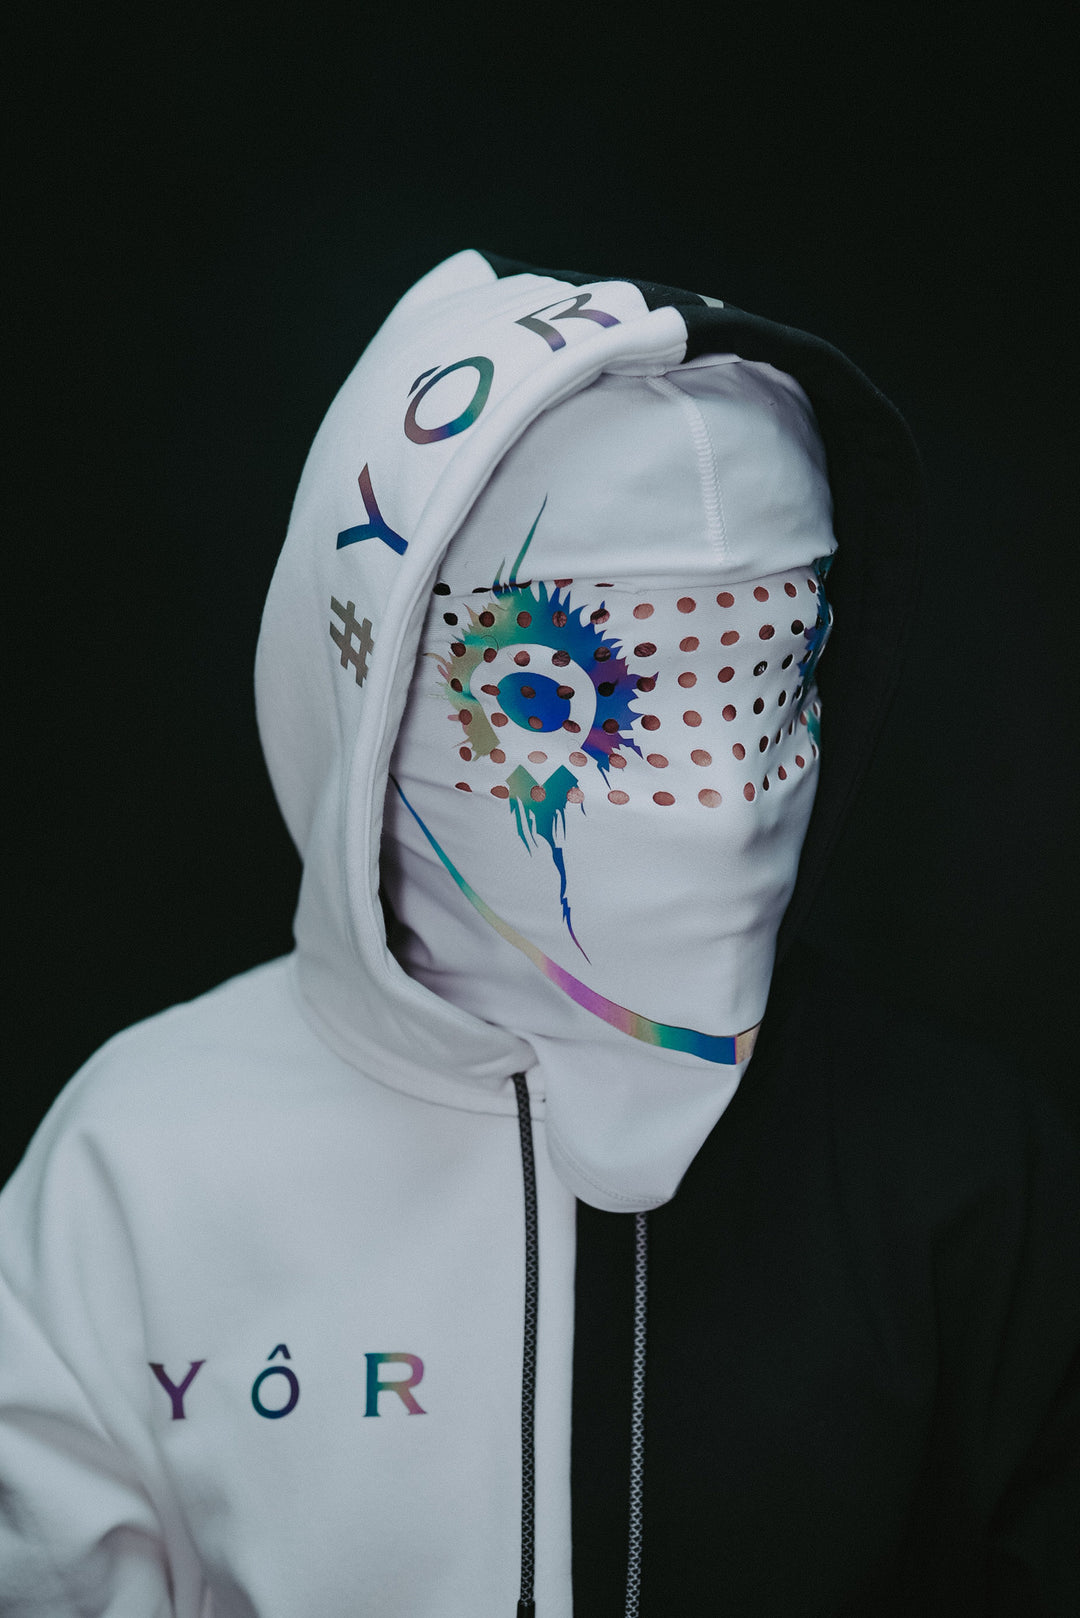 The 3M Mask (Limited)